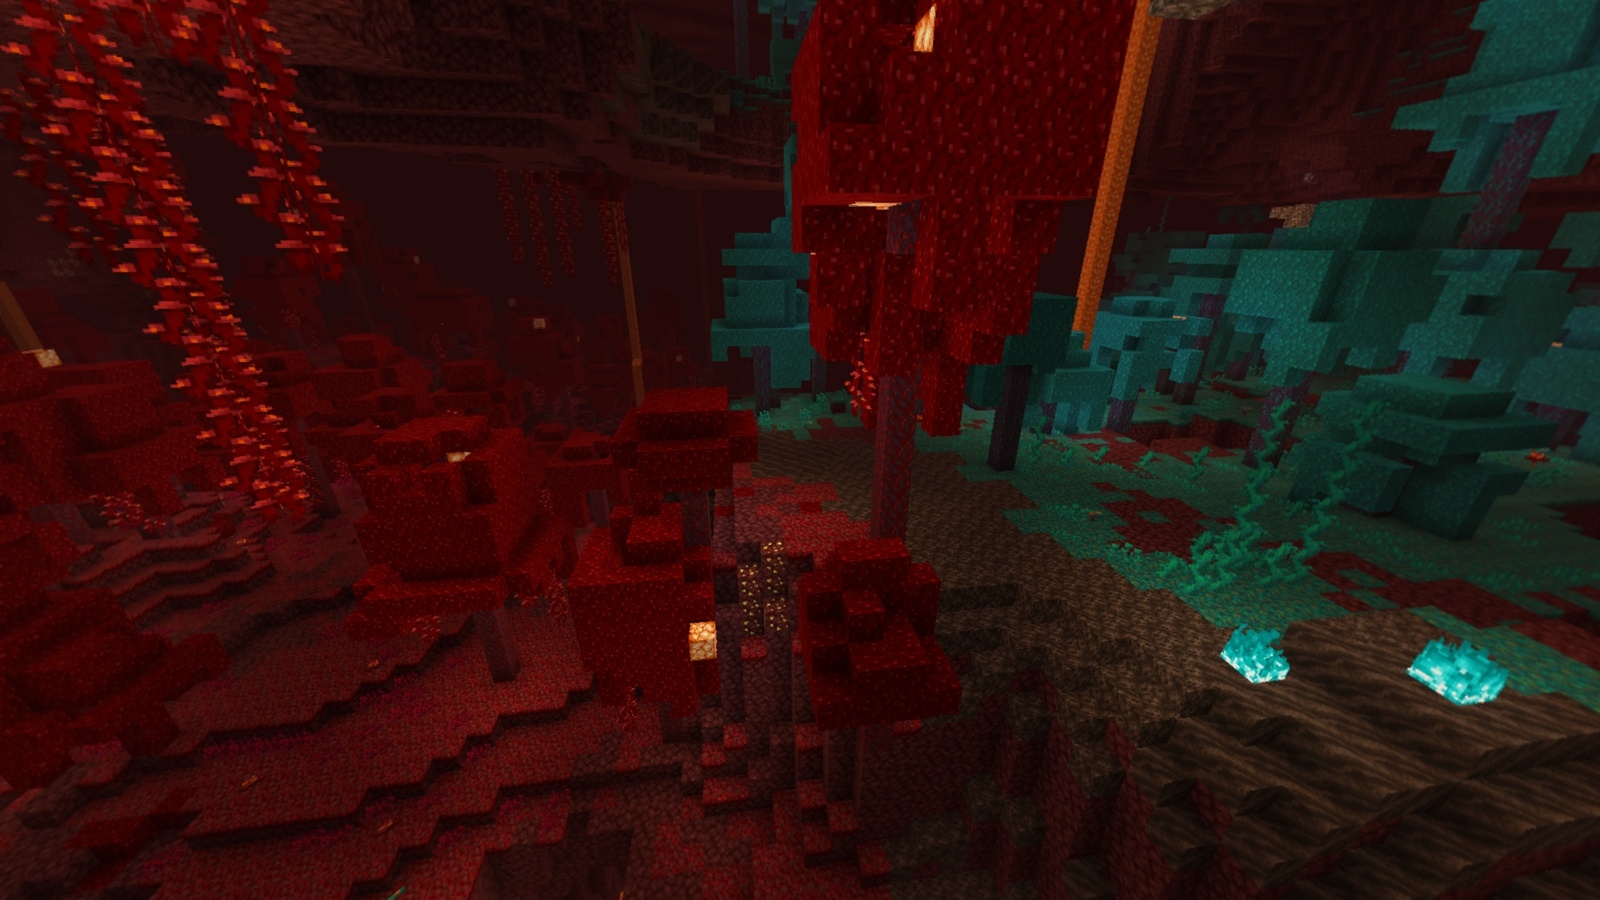 The 1.16 showing the new nether biomes crimson forest and warped forest